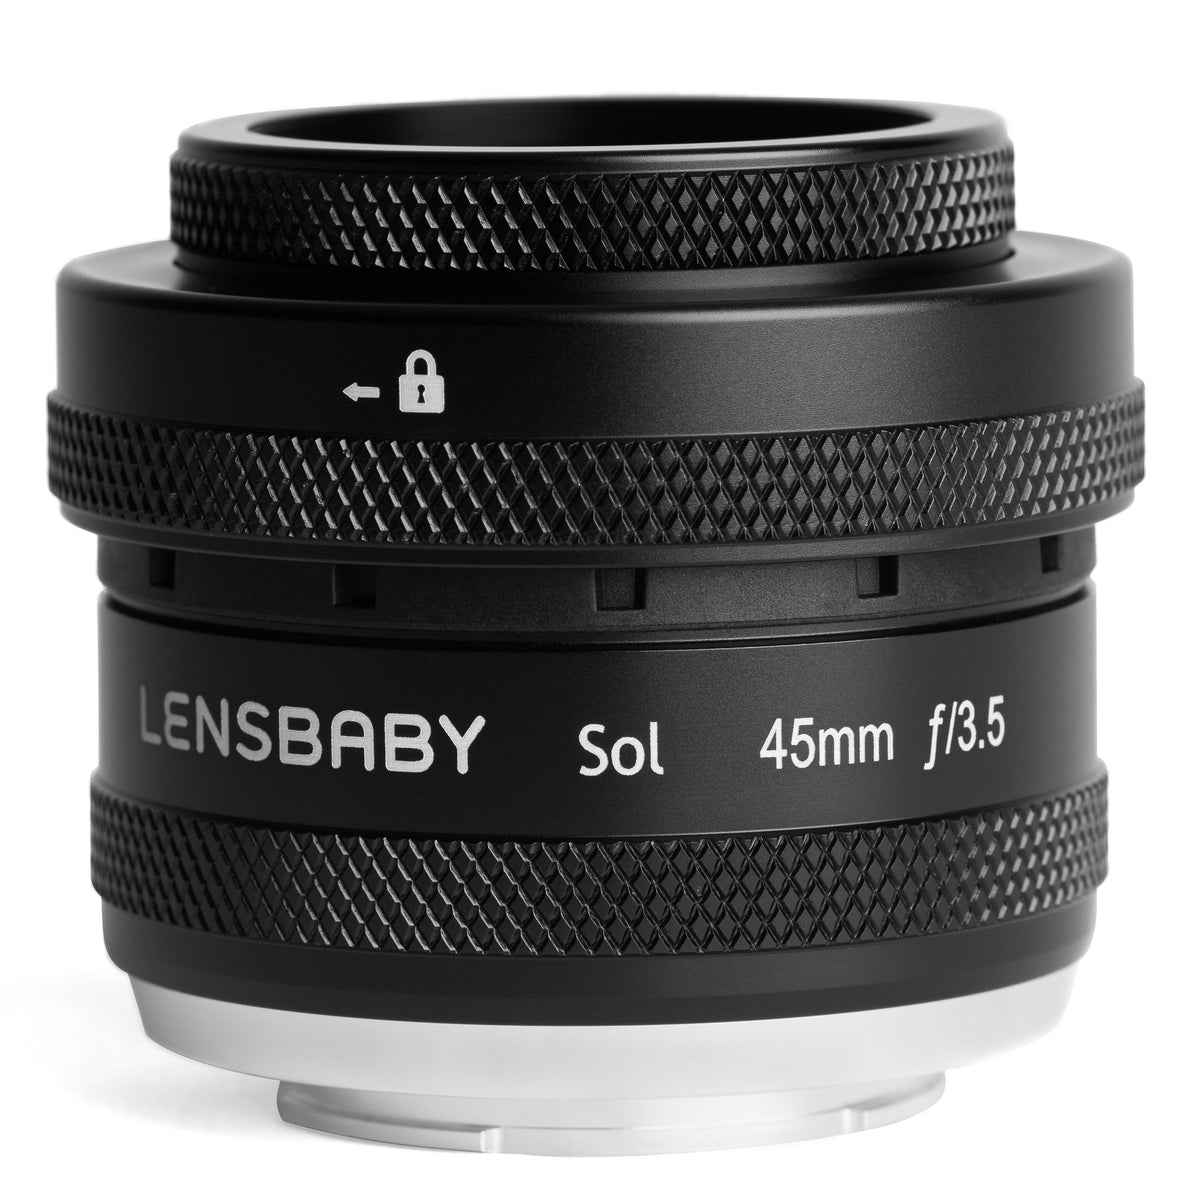 Sol 45 | Camera Lens For Creative Bokeh Effects | Lensbaby